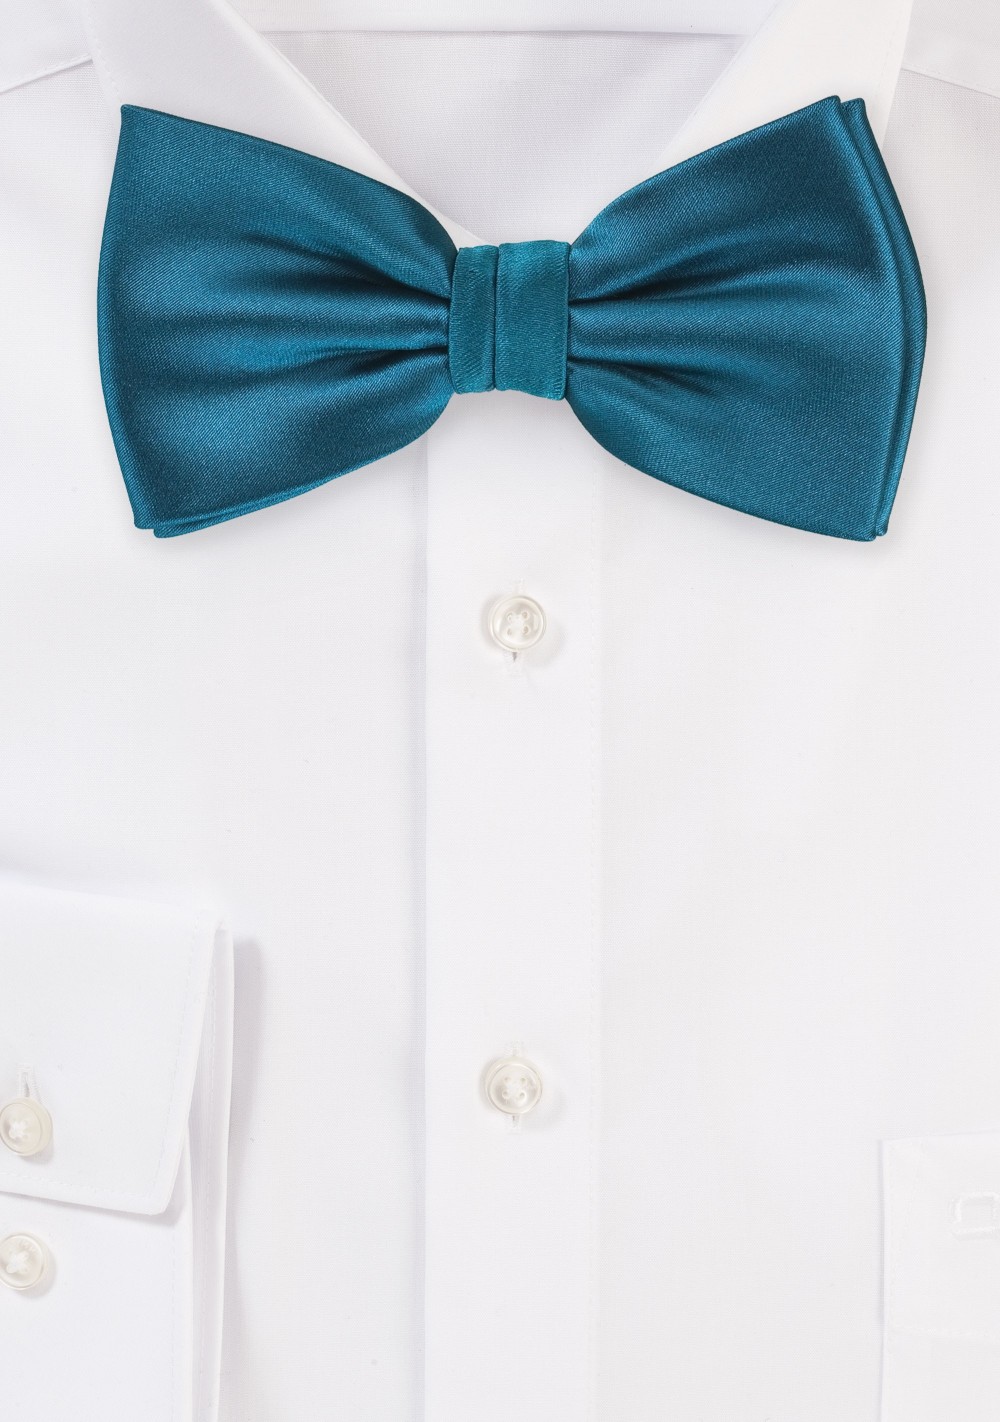 Turquoise Blue Bow Tie for Men